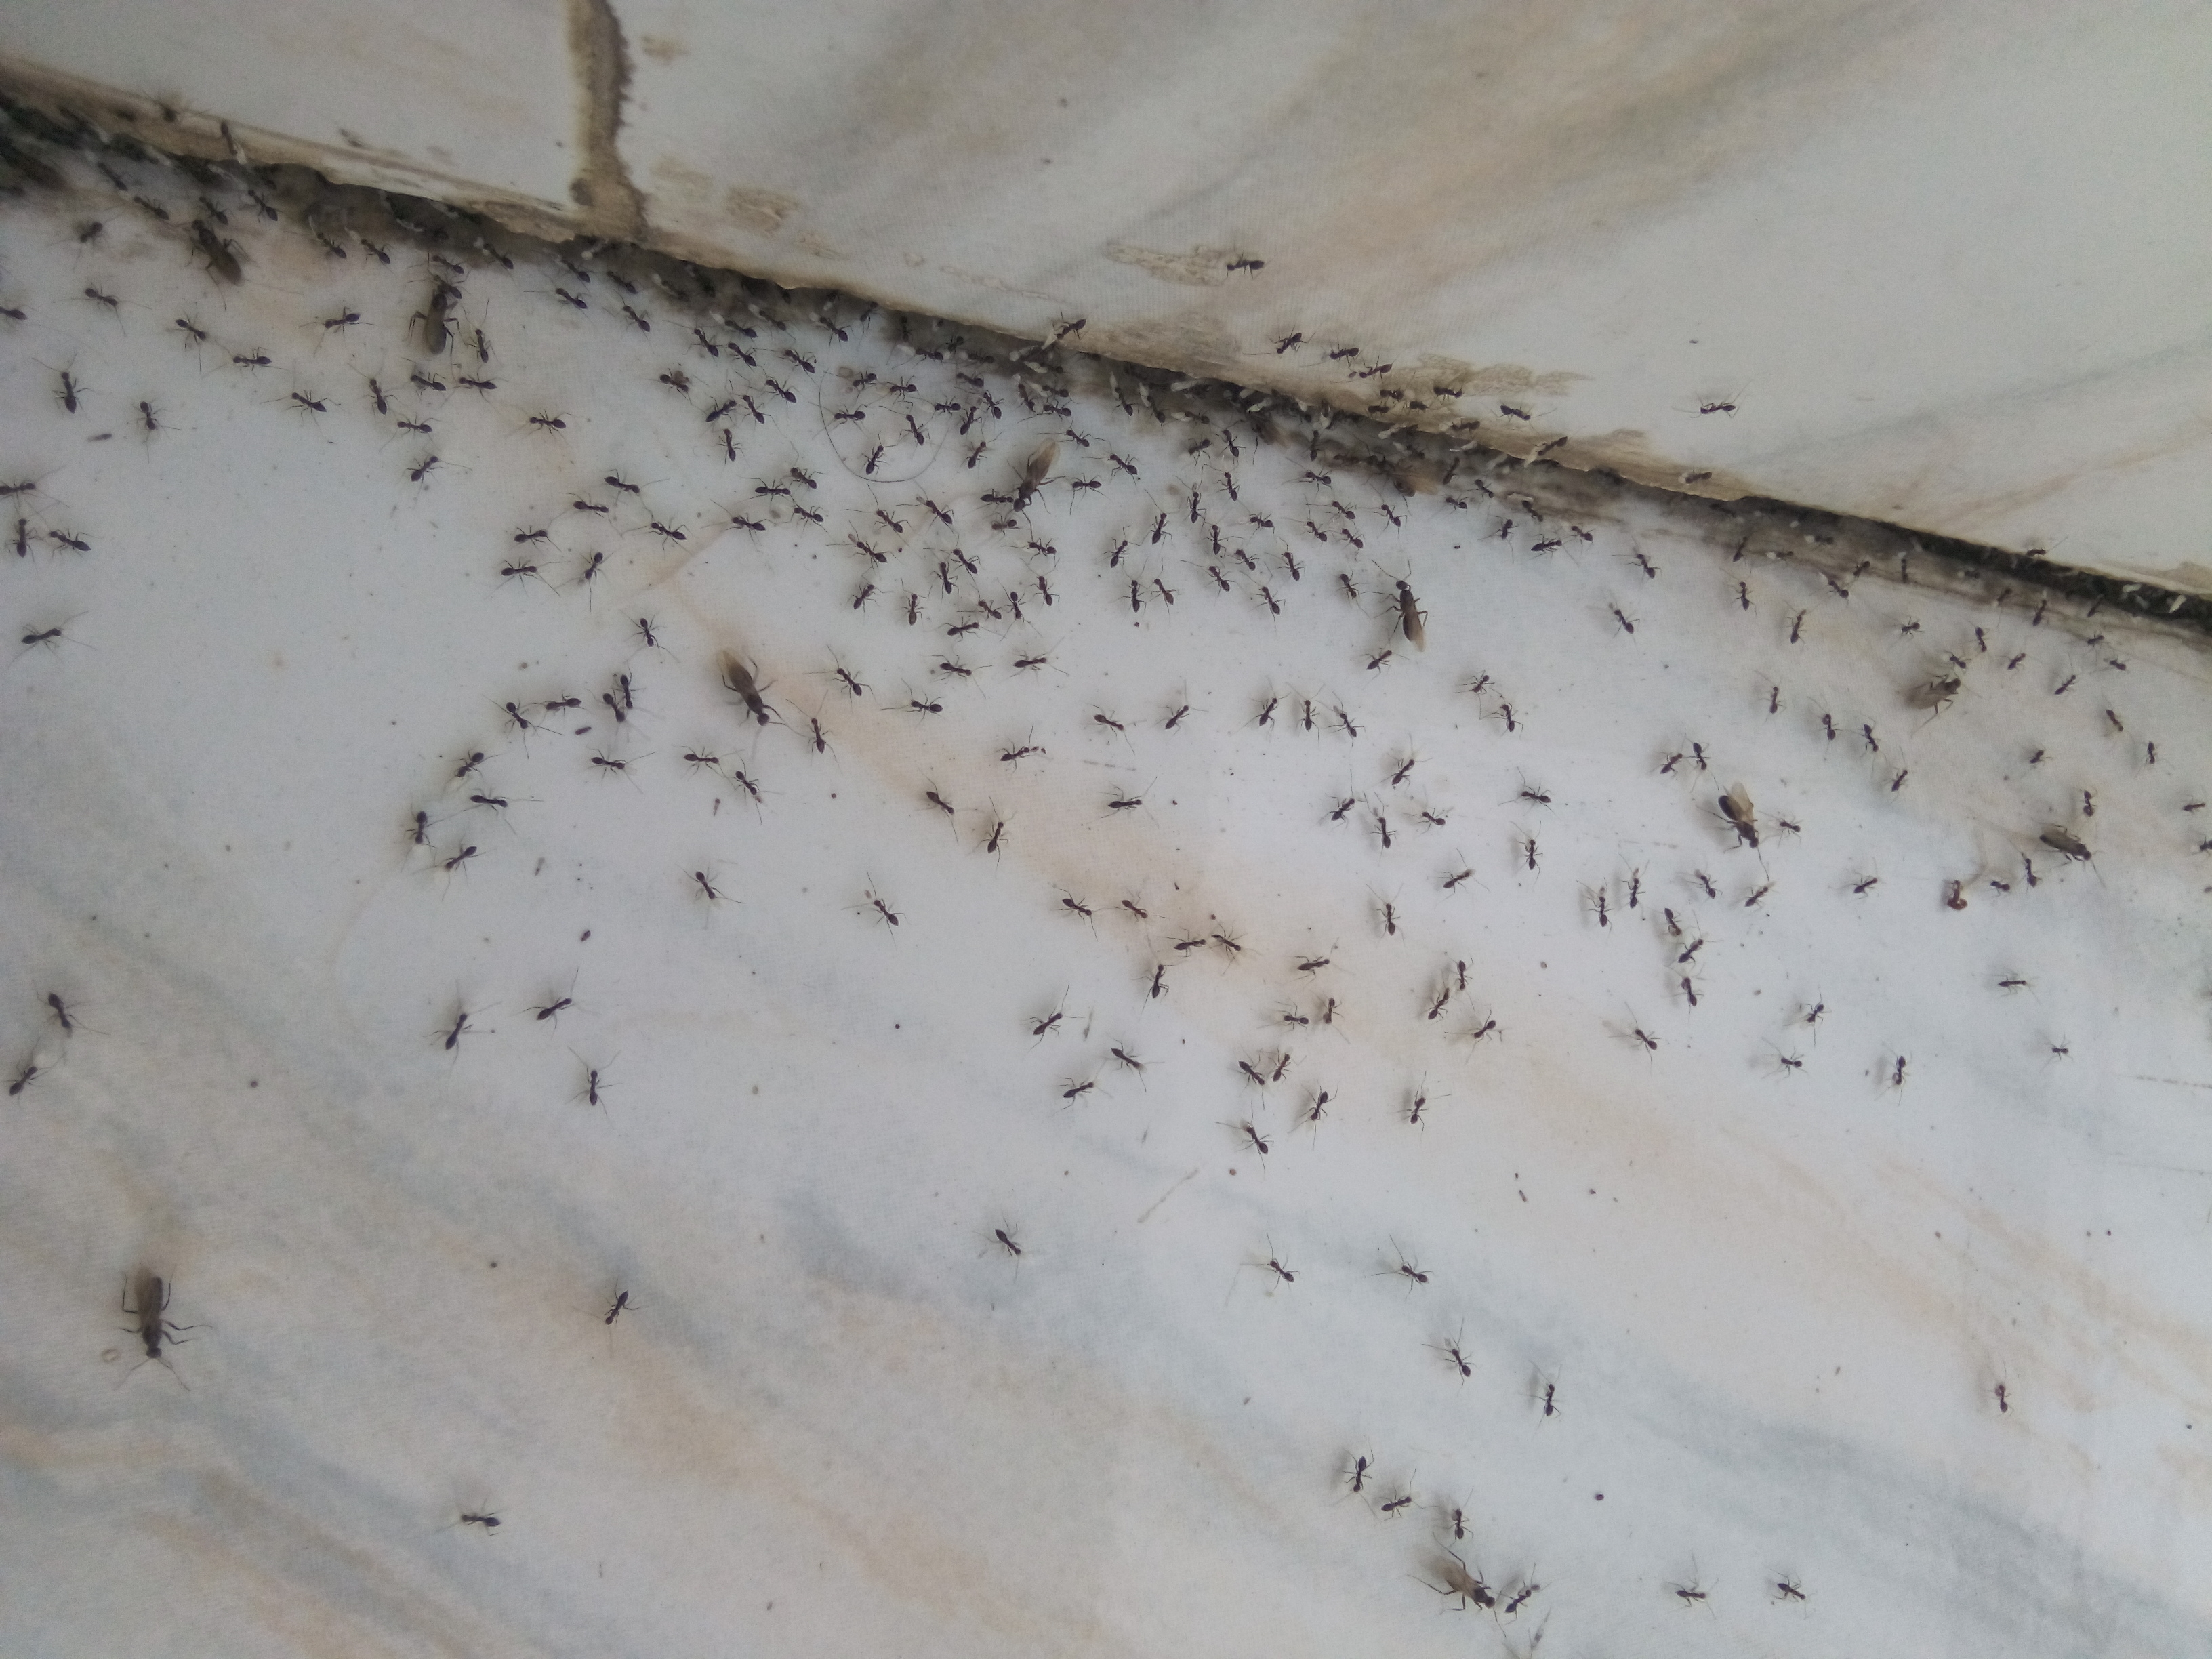 Ant infestation in Manly